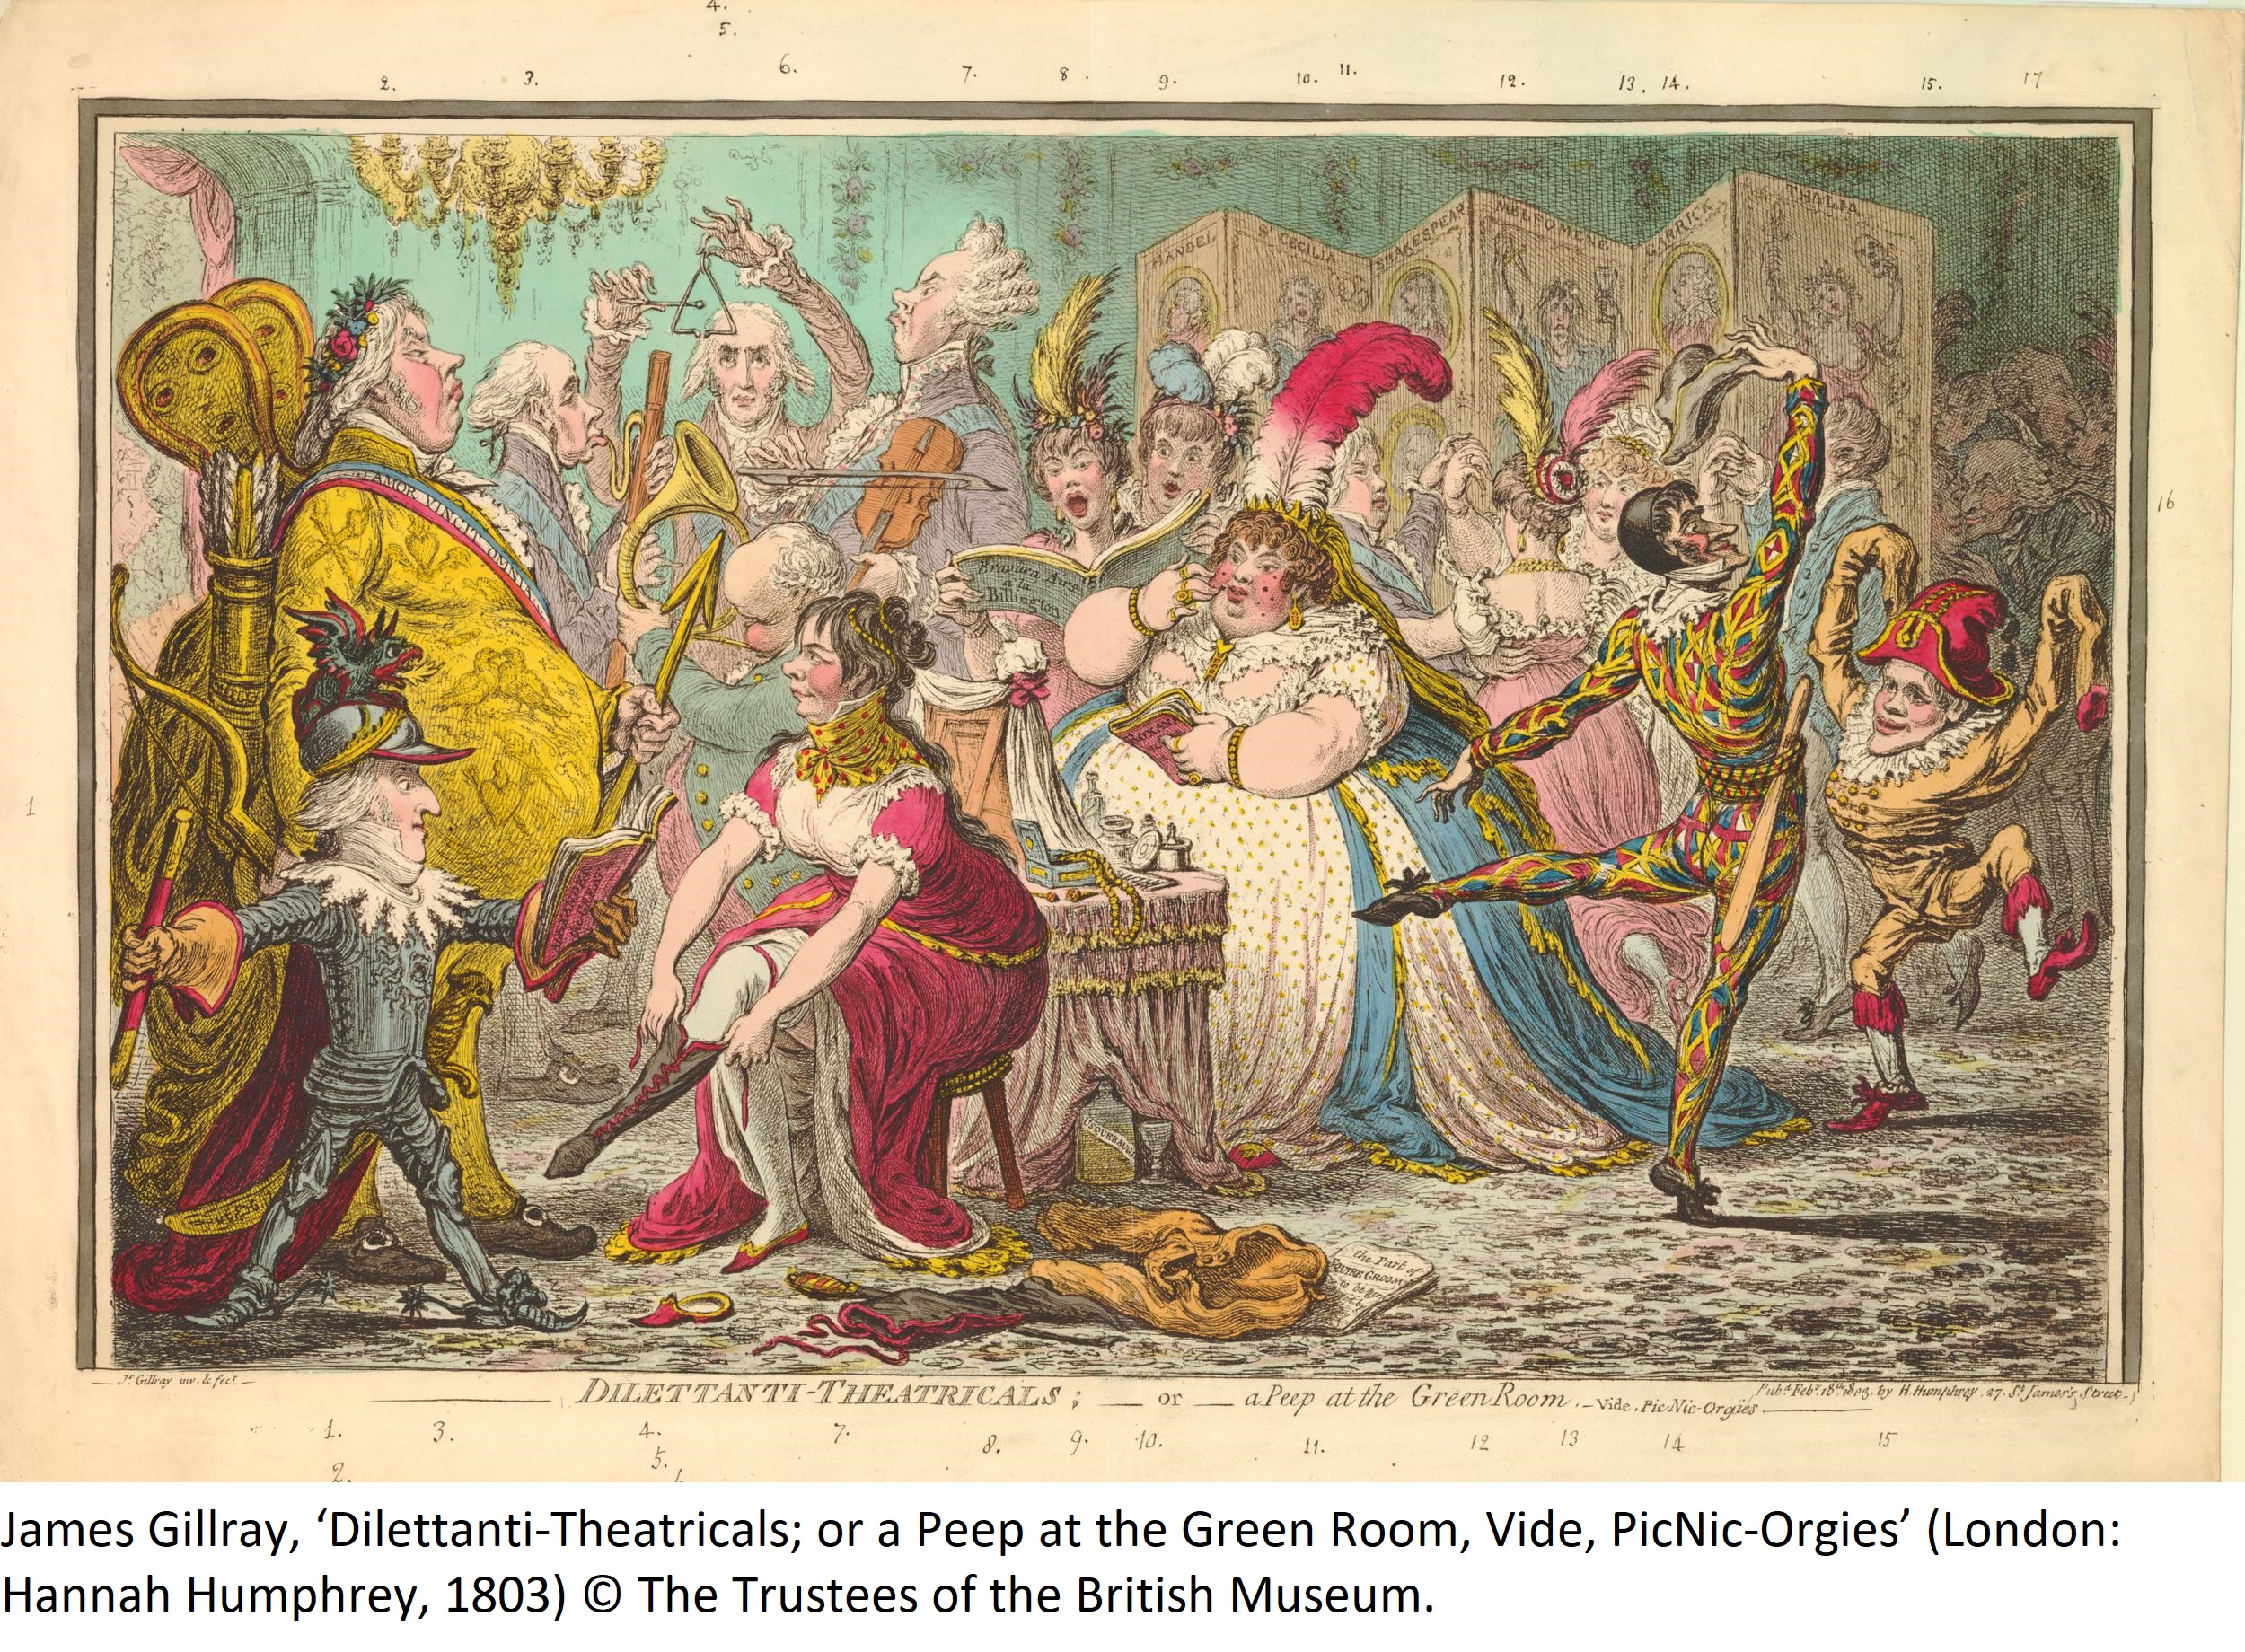 James Gillray, ‘Dilettanti-Theatricals; or a Peep at the Green Room, Vide, PicNic-Orgies’ (London: Hannah Humphrey, 1803) © The Trustees of the British Museum.